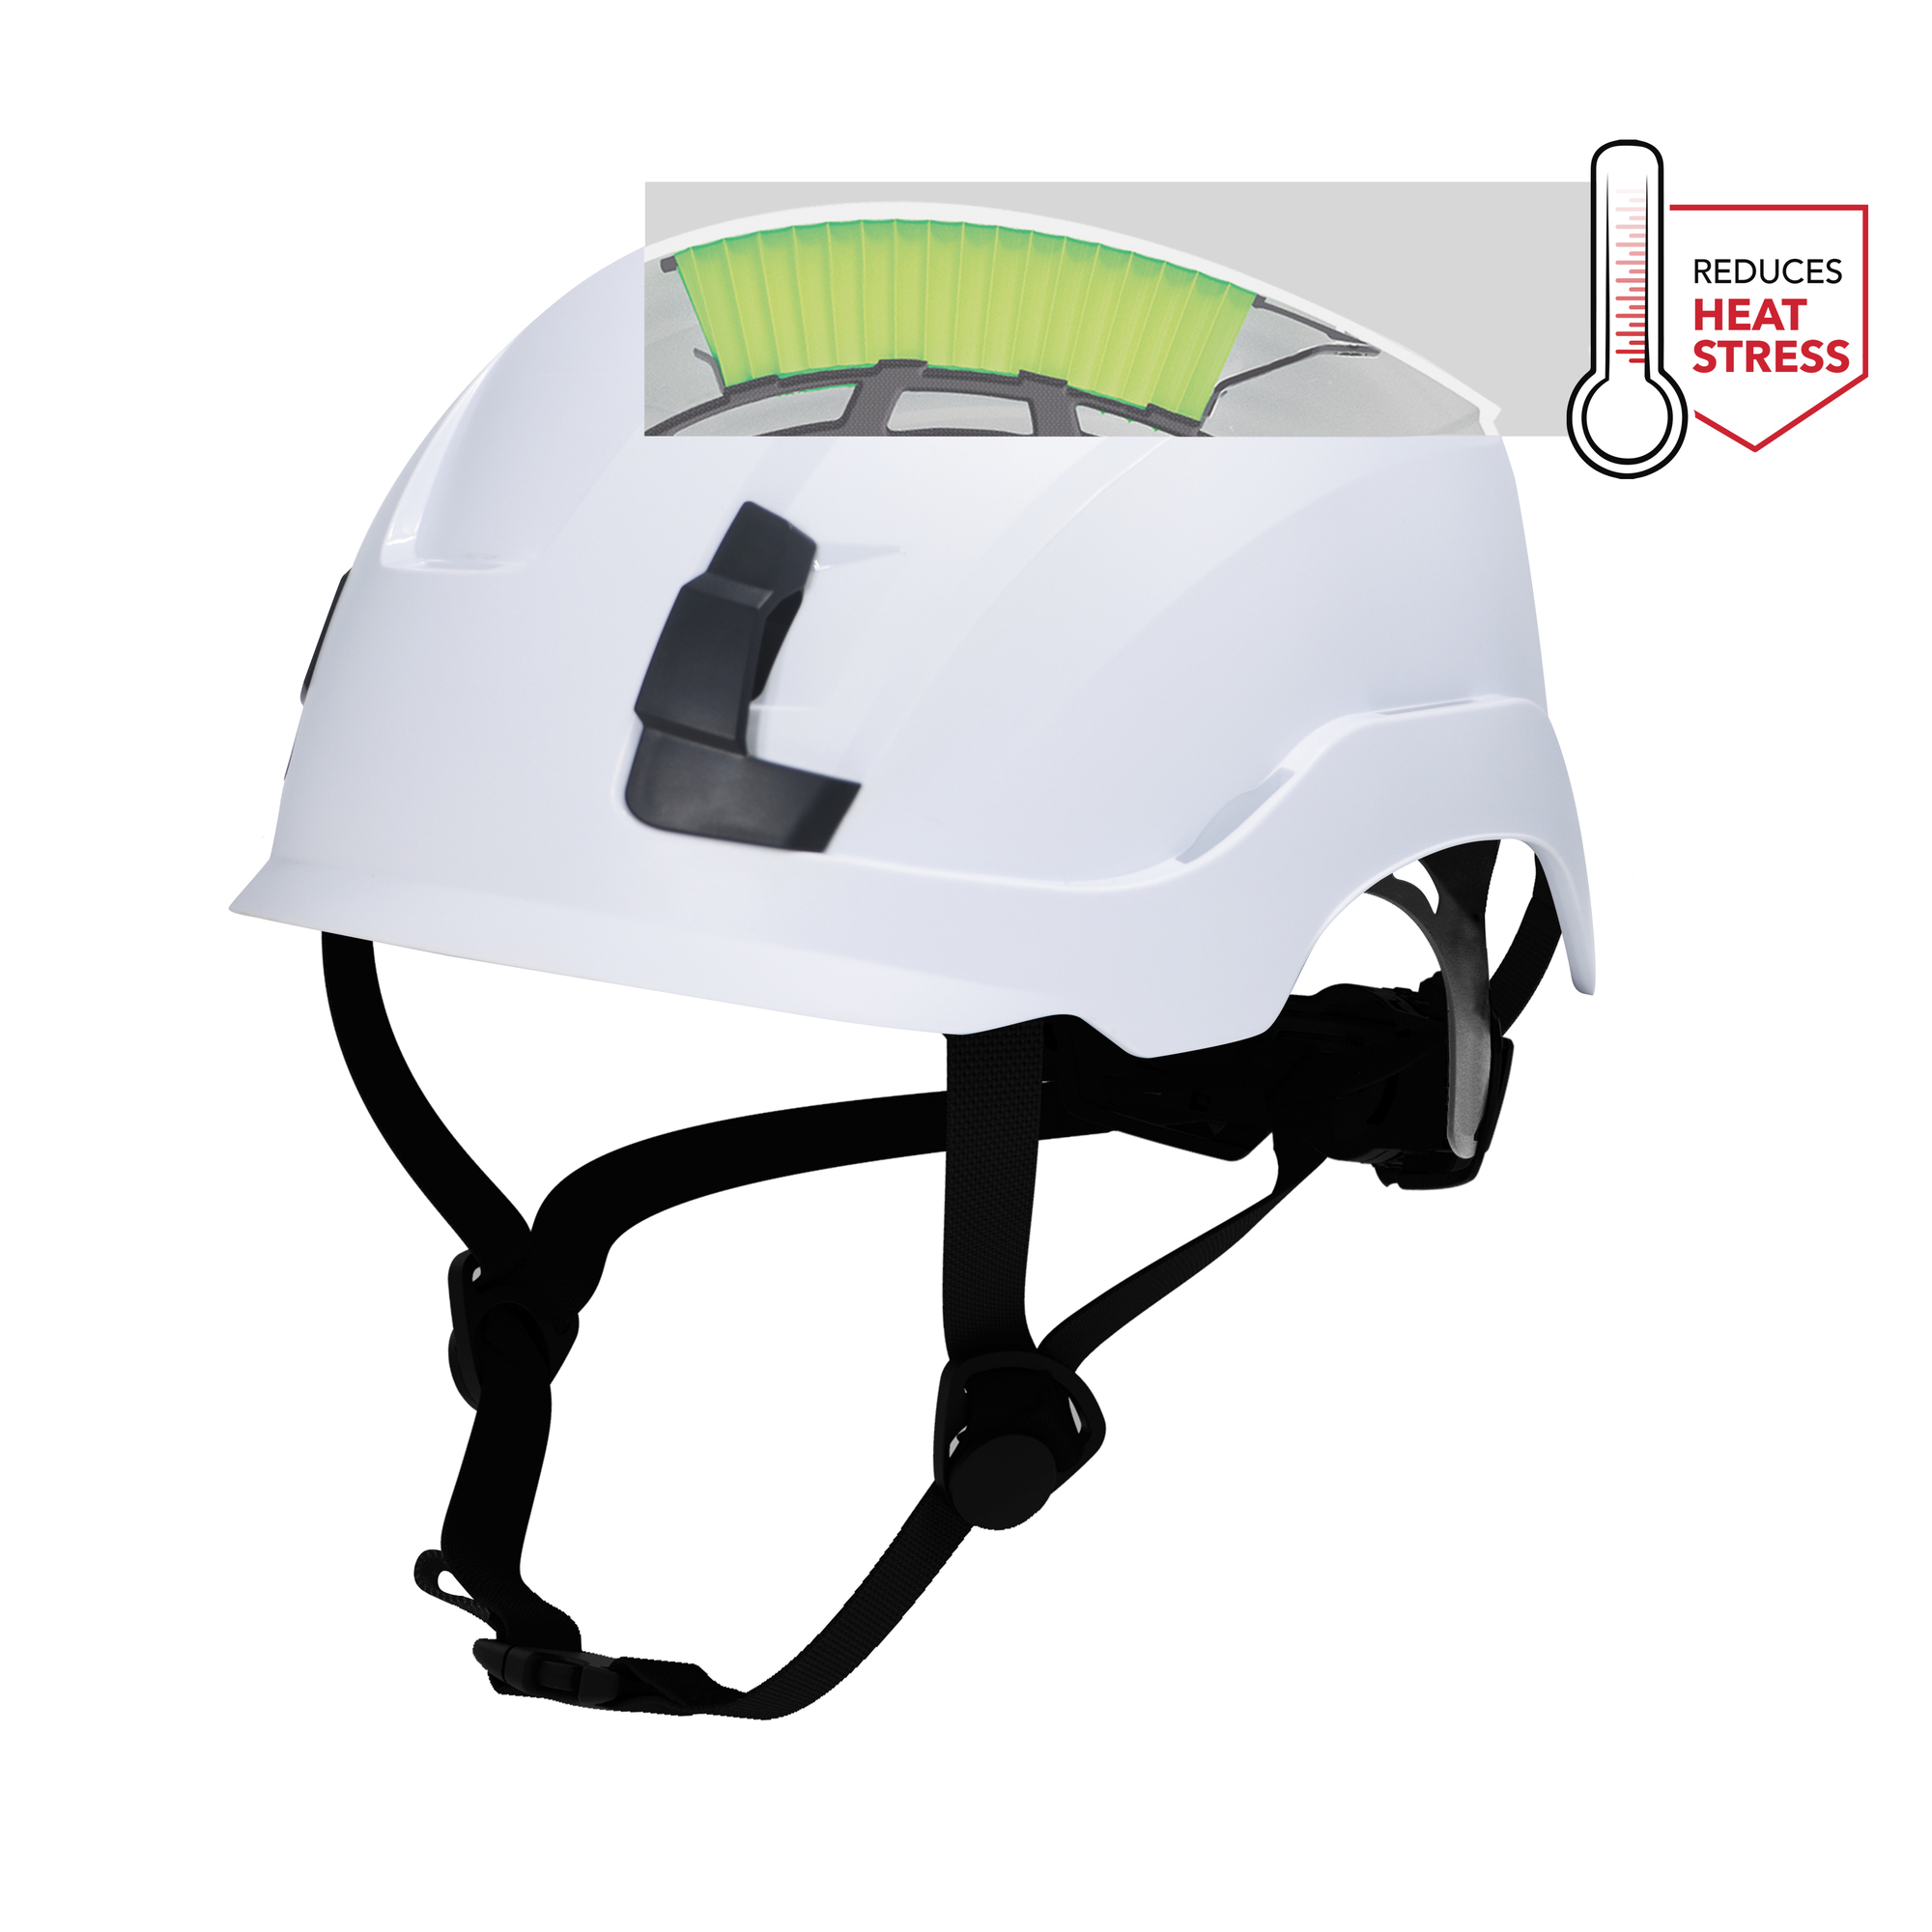 General Electric, Low-Profile White GH400 Safety Helmet Vented, Hard Hat Style Helmet, Hat Size Adjustable, Color White, Model GH400W